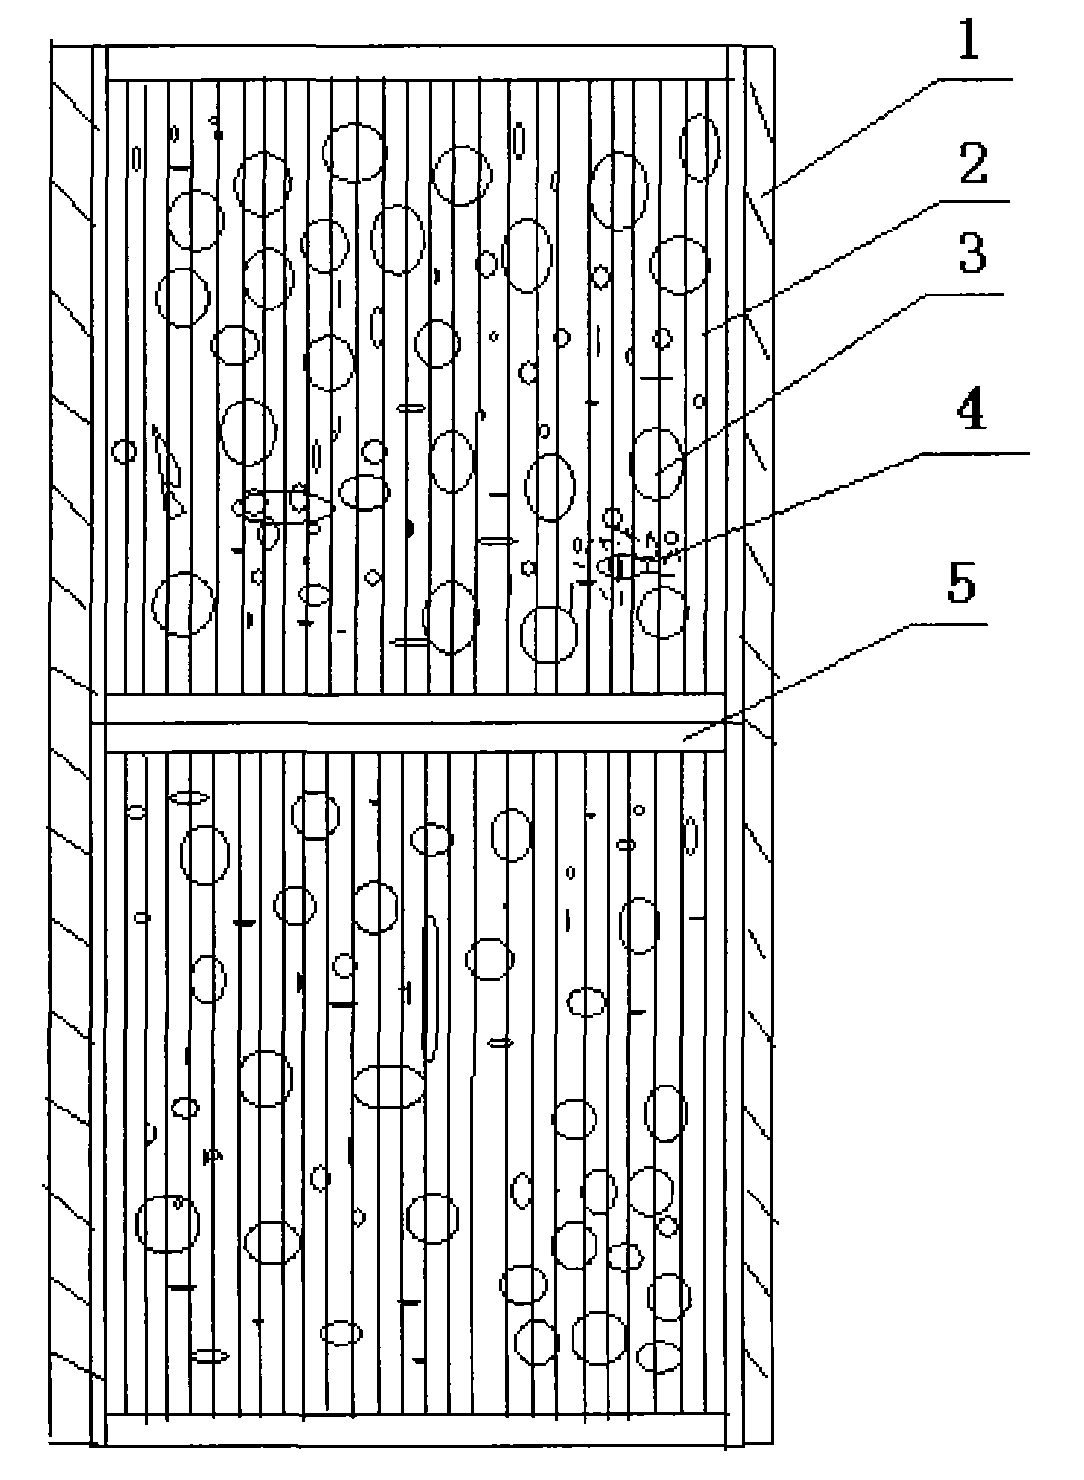 Artificial bed stone and gravity separation method for complex ores